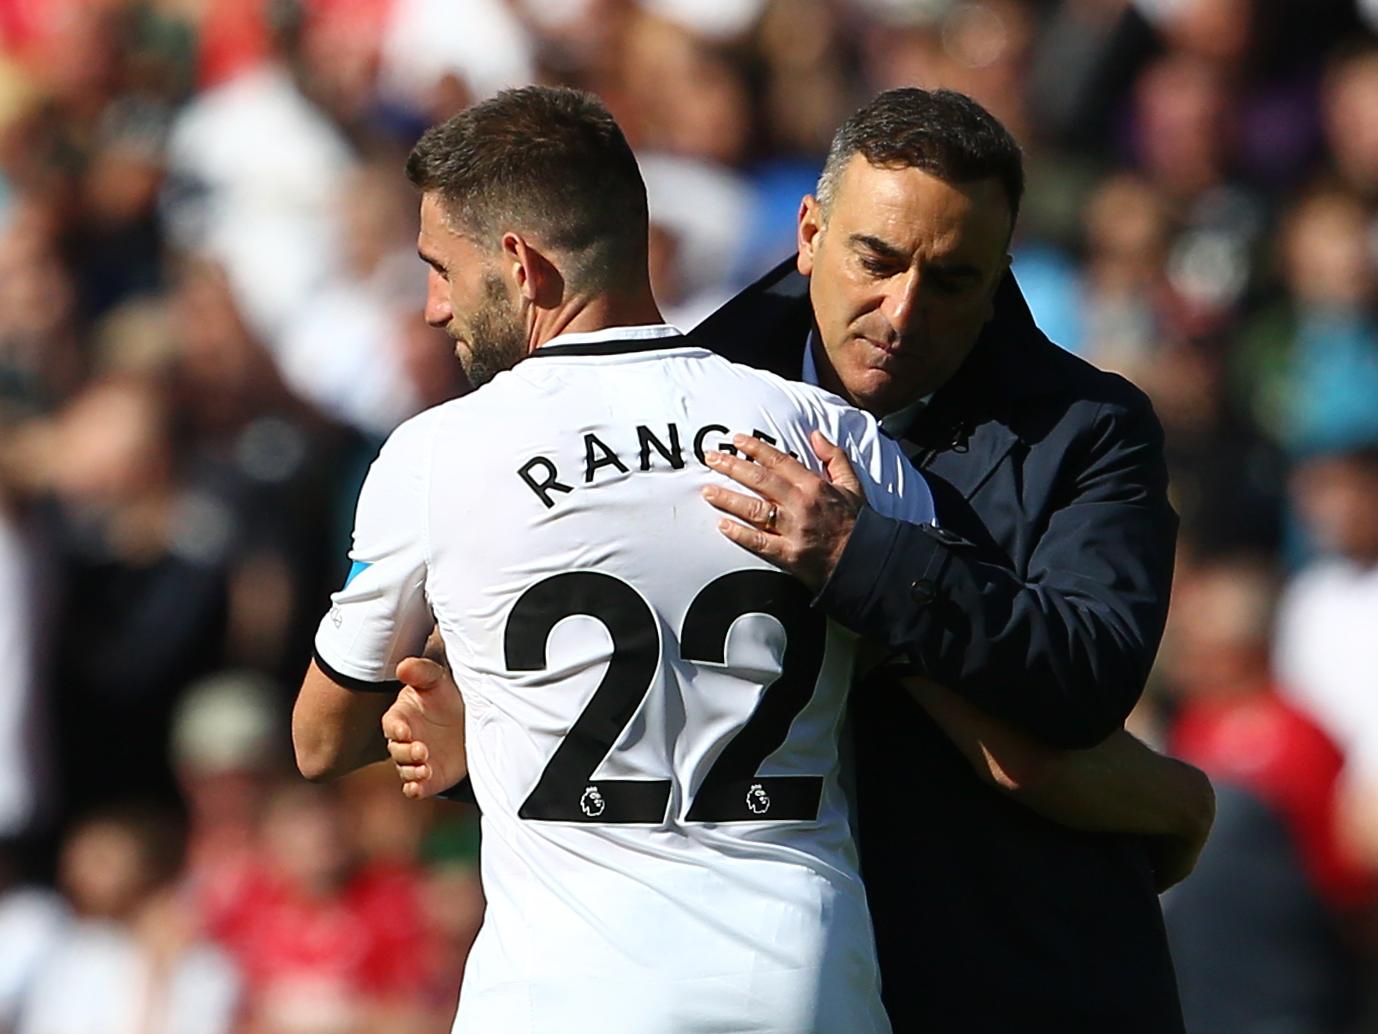 Former Swansea City ace Angel Rangel has claimed he quit the club last year, after over a decade with the side, after they failed to deliver on offering him a new contract. (Football League World)